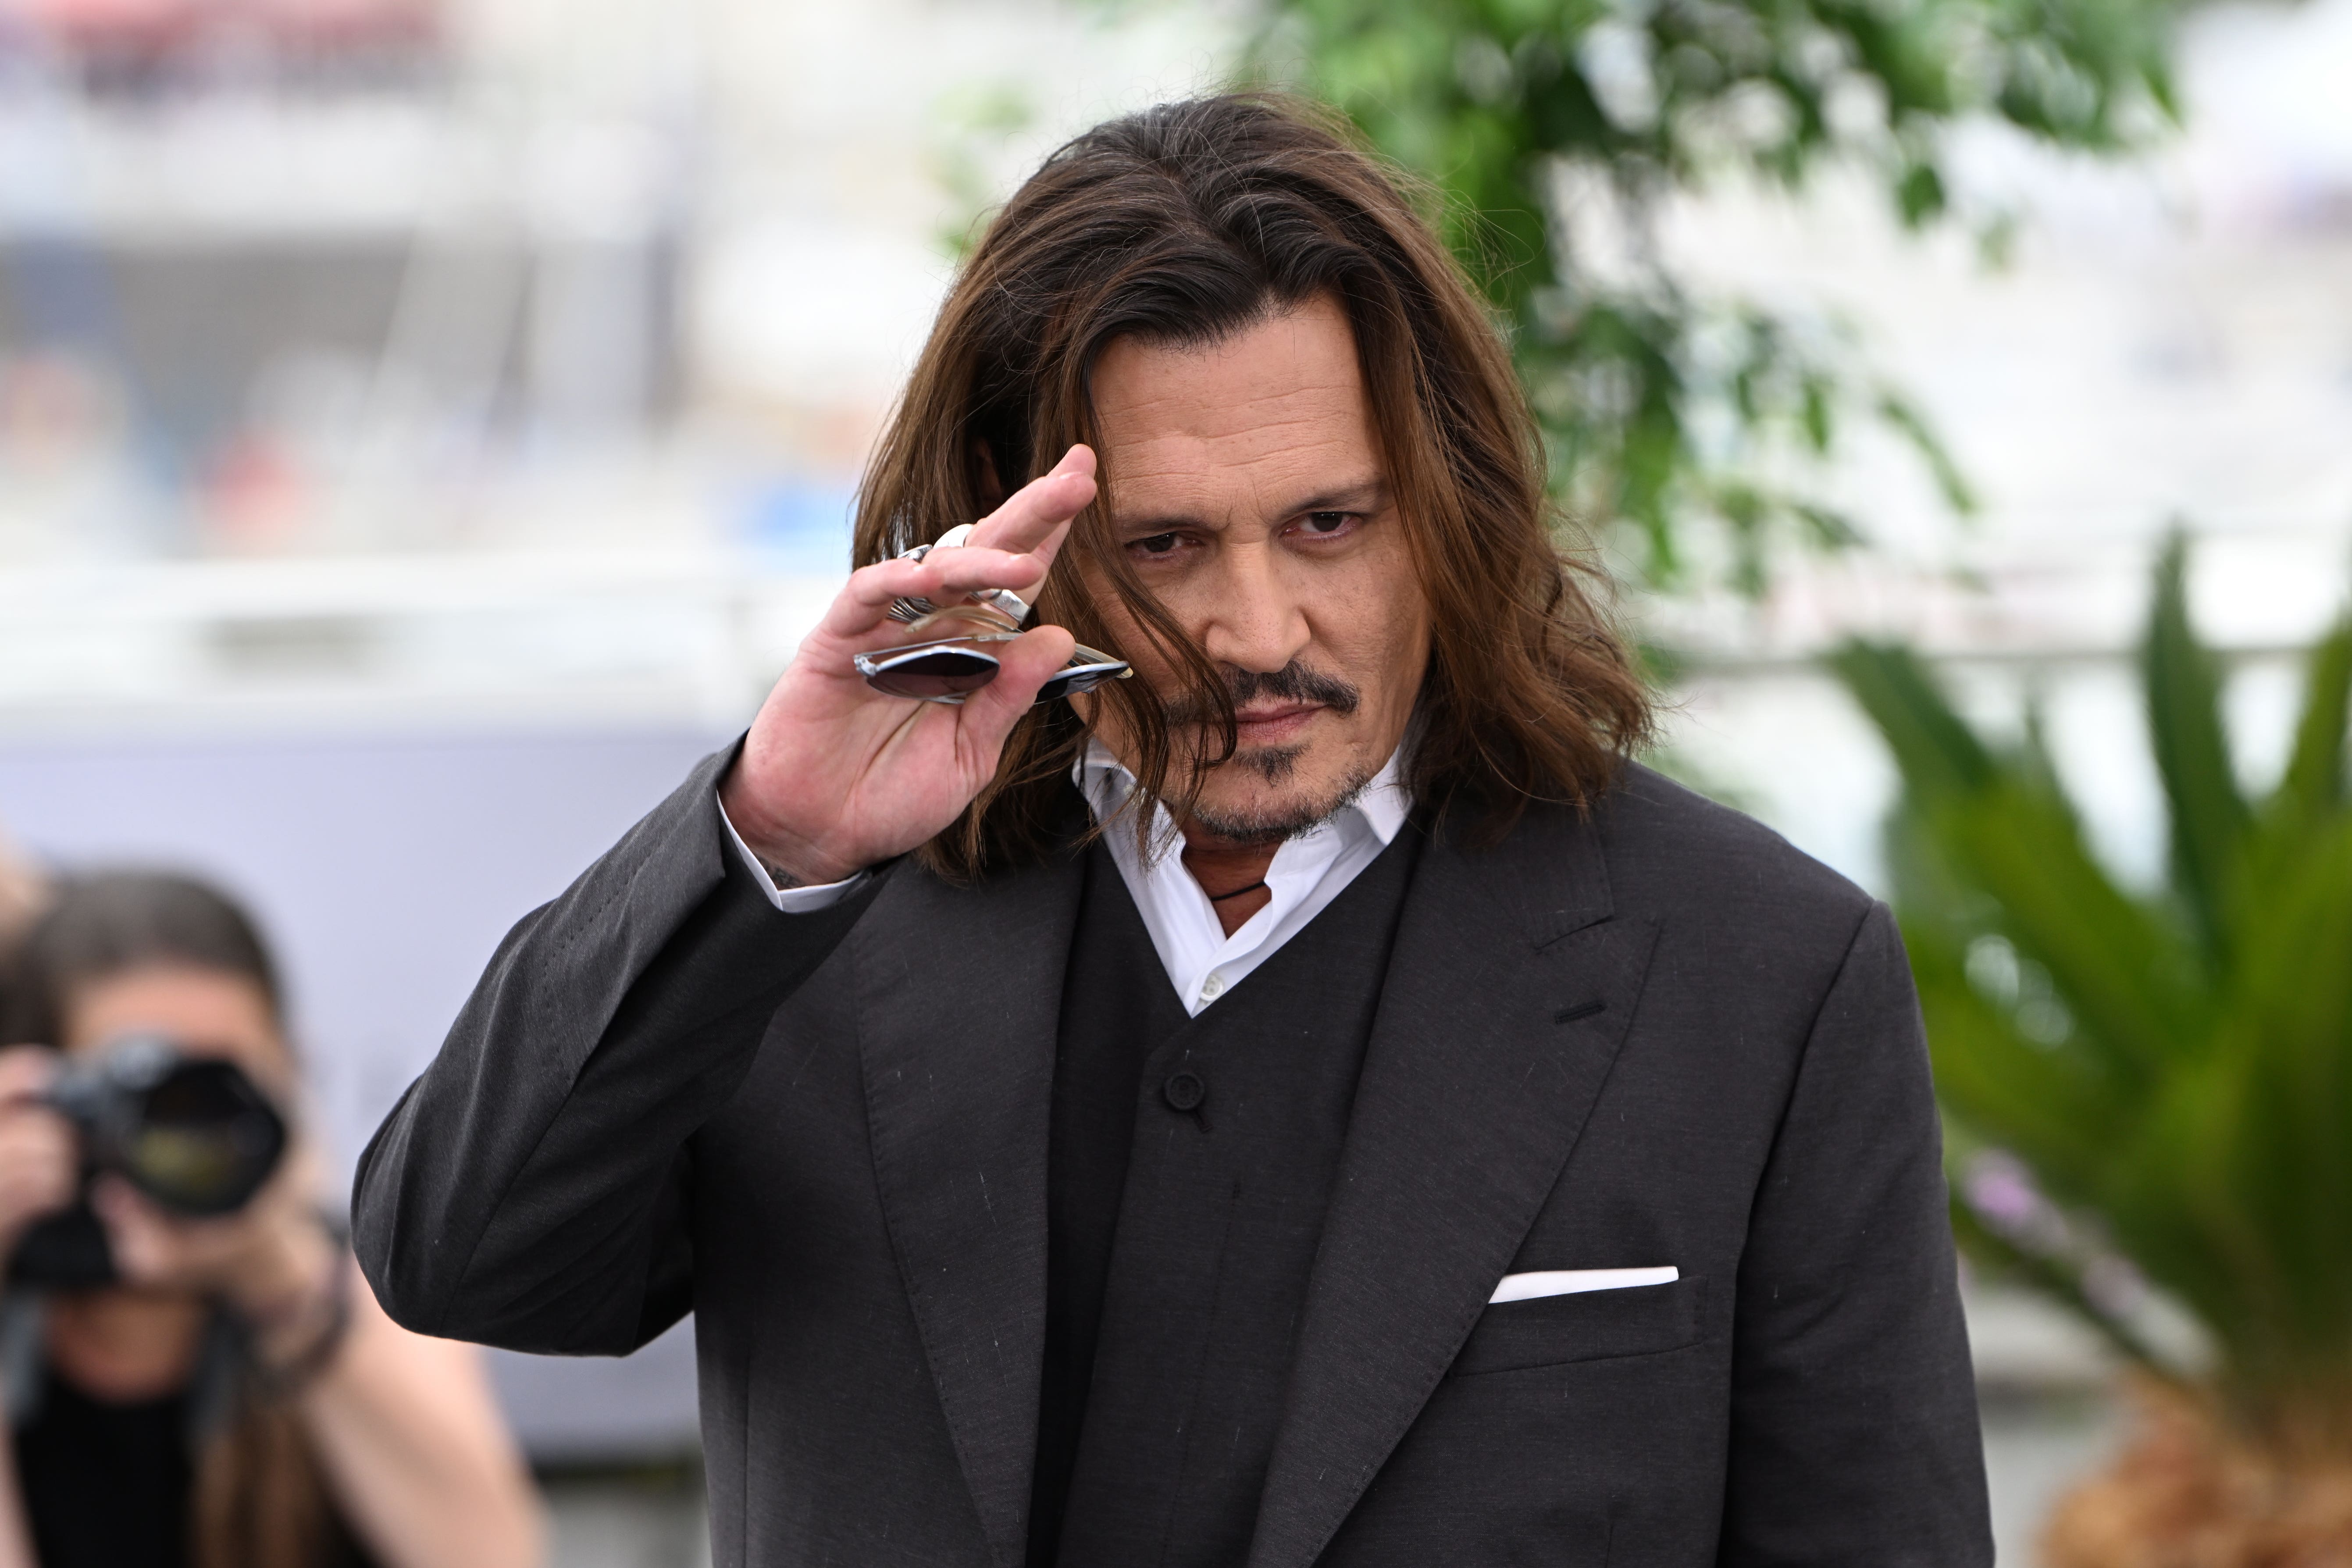 Depp returned to the screen in May